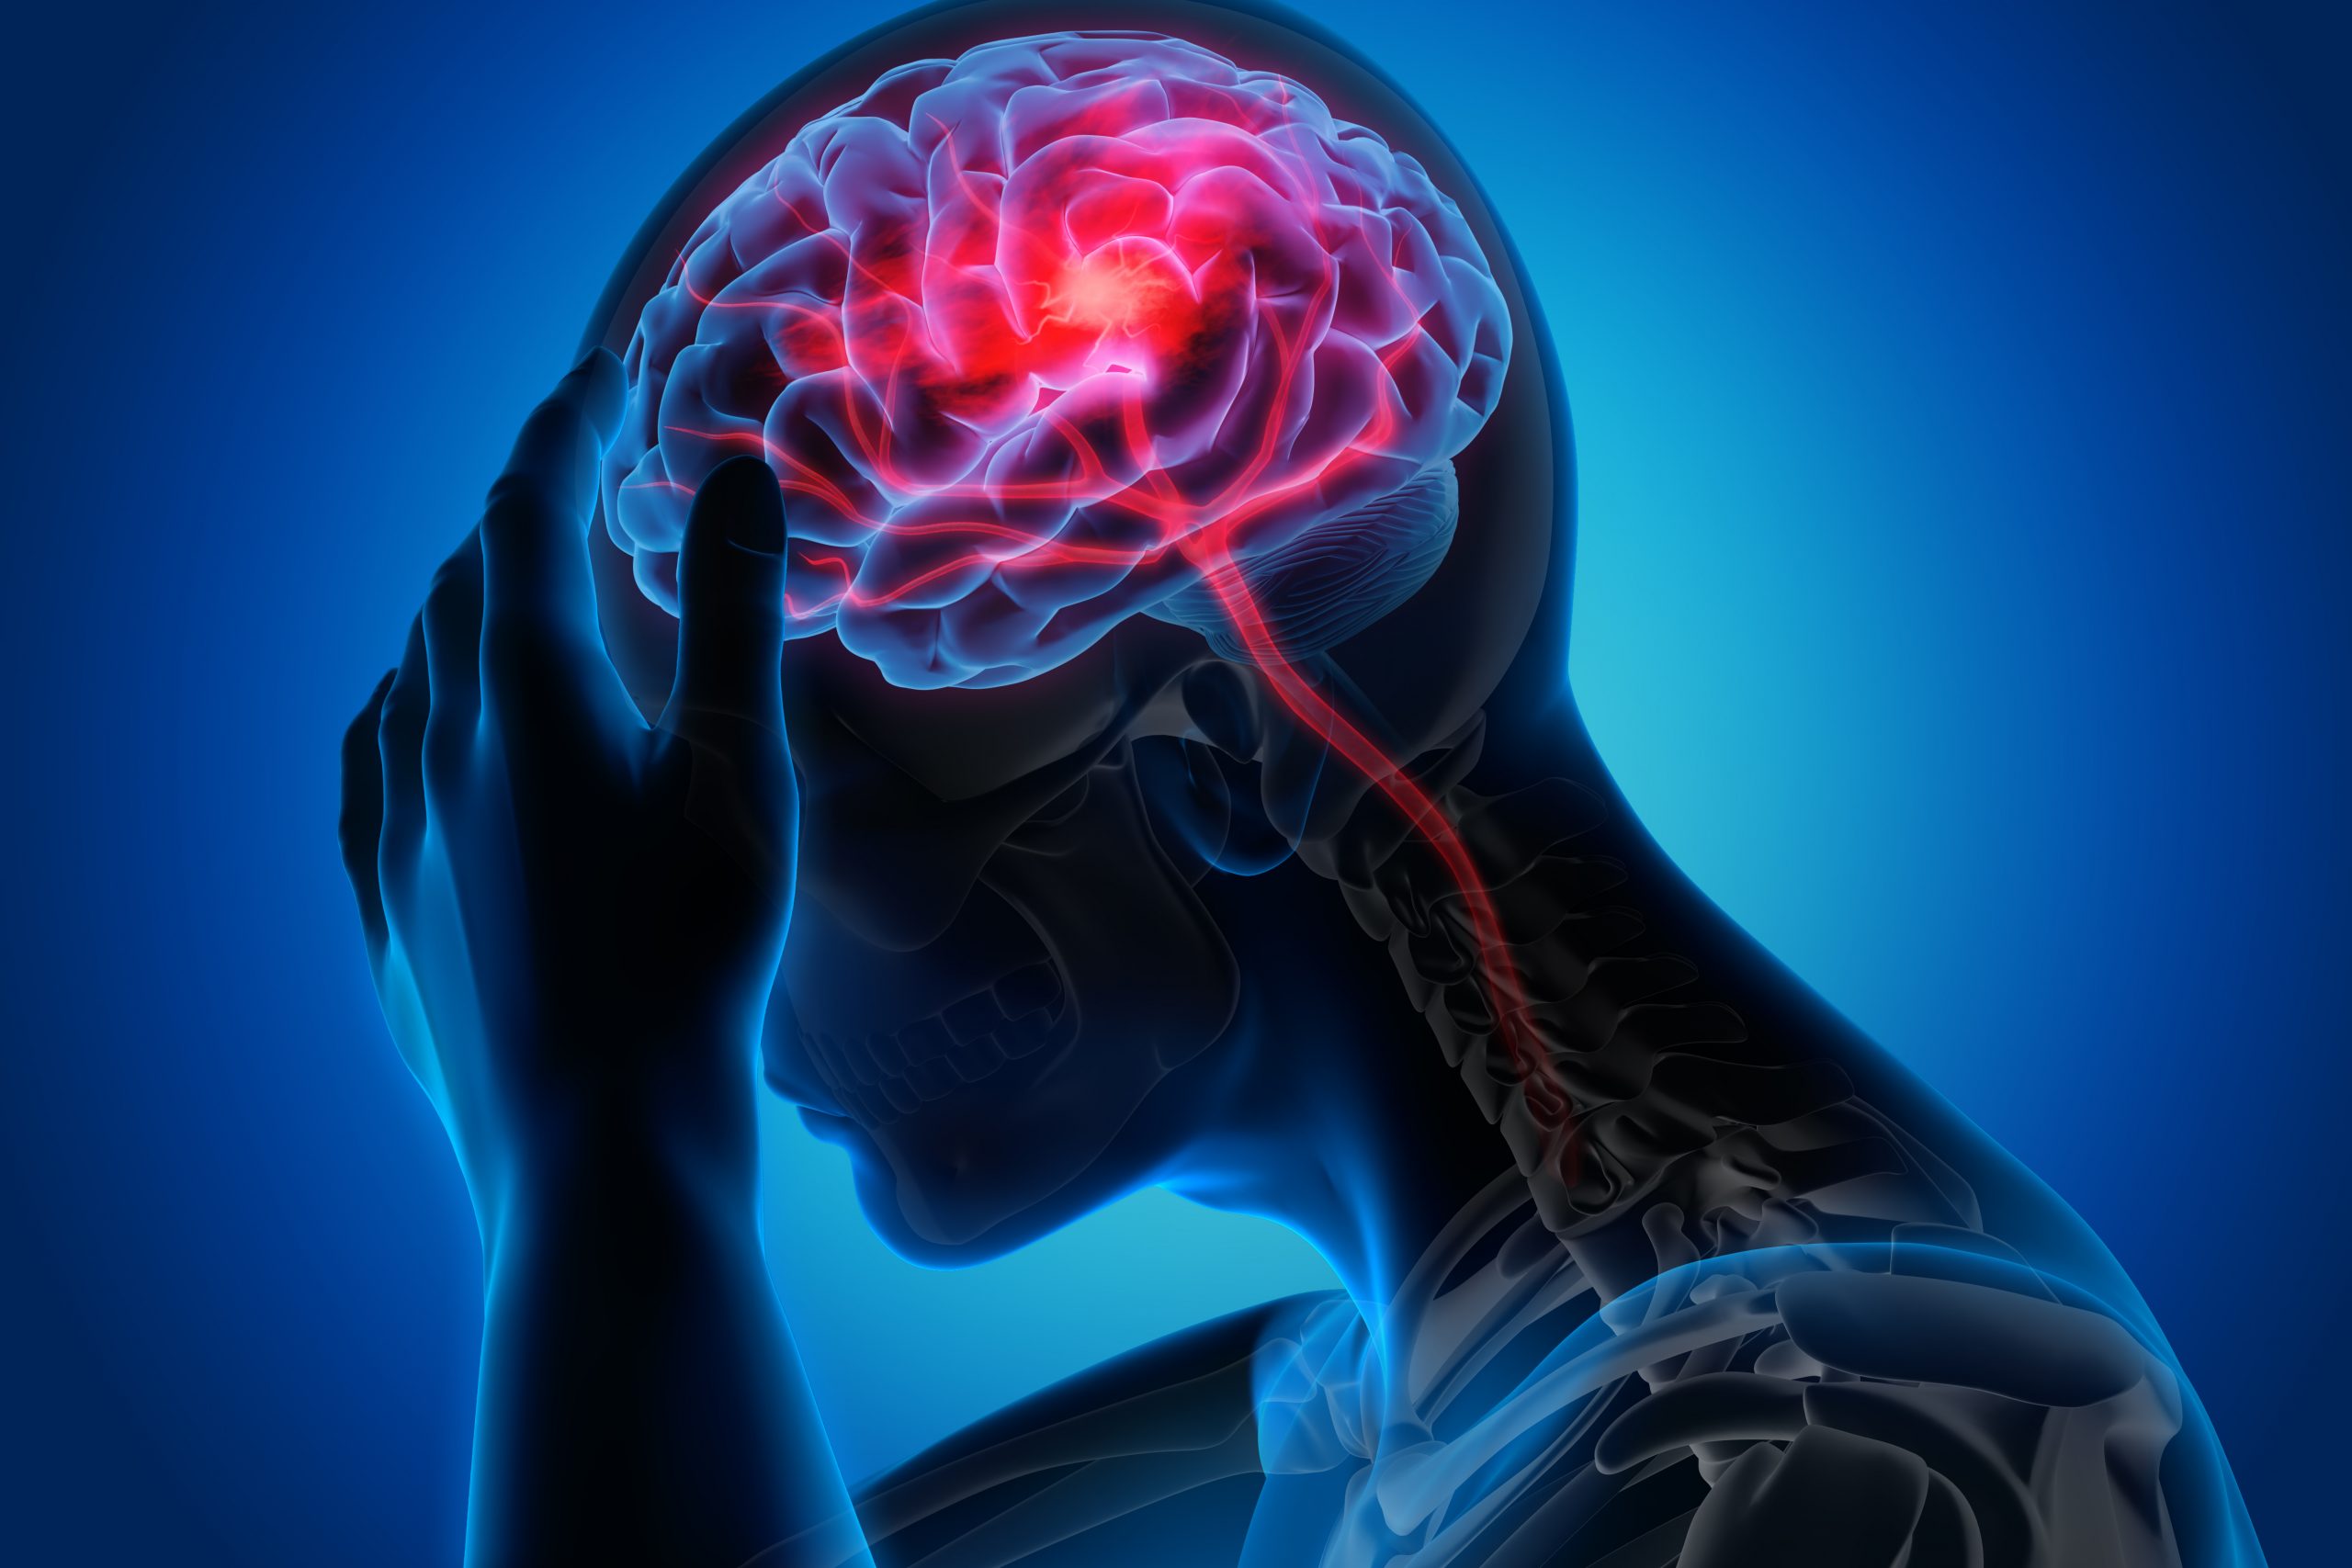 Illustration of a person in profile with brain visible. Red line tracks from the base of the next up into the brain, where it expands into many branches in a firework pattern.